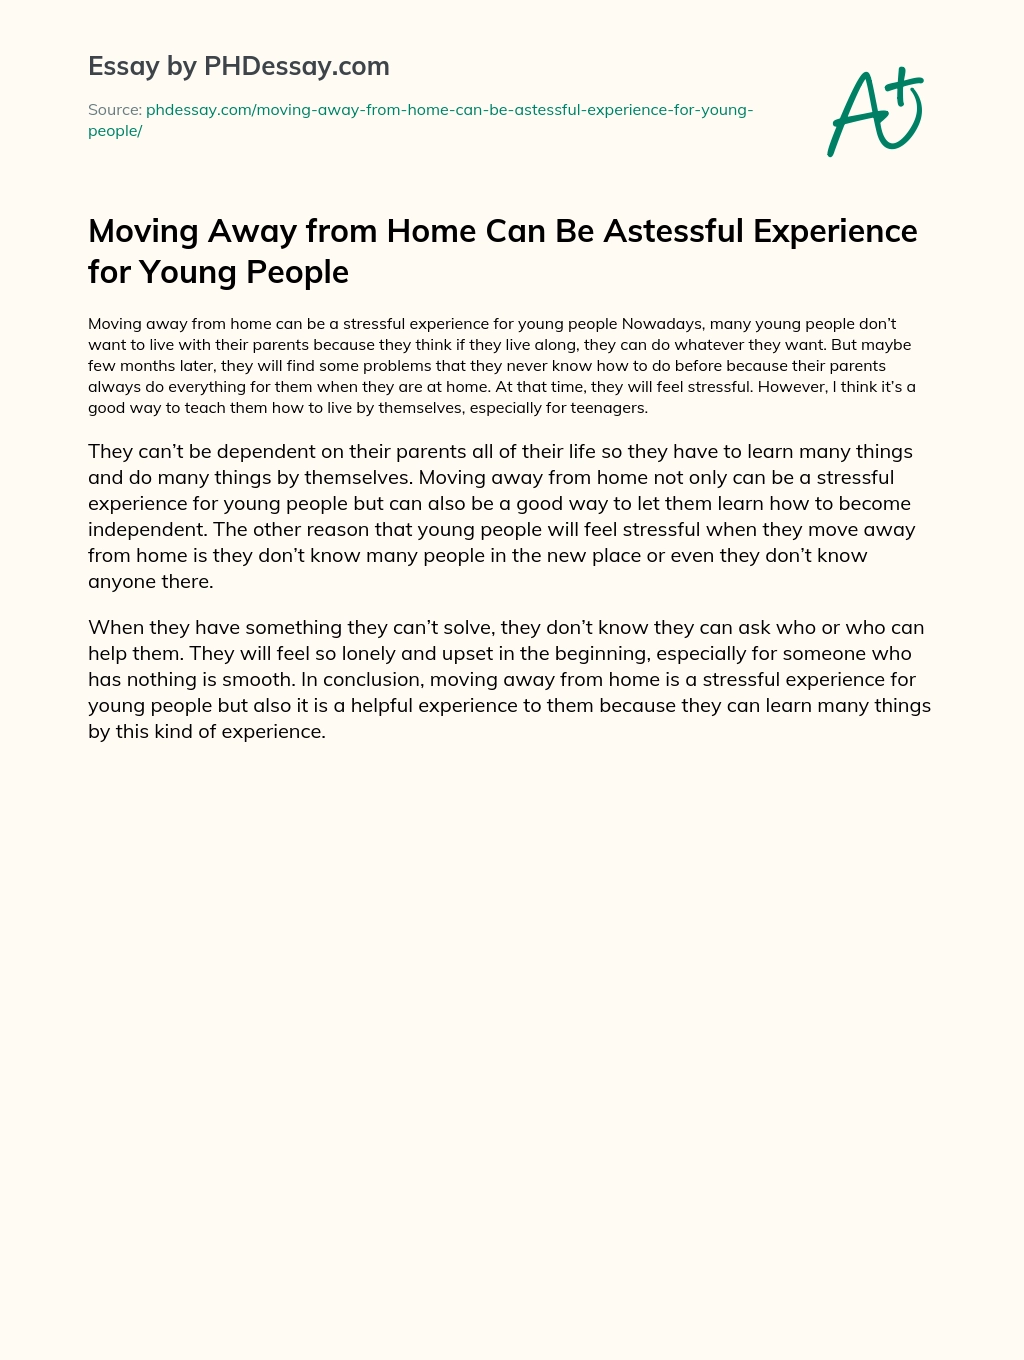 Moving Away from Home Can Be Astessful Experience for Young People essay